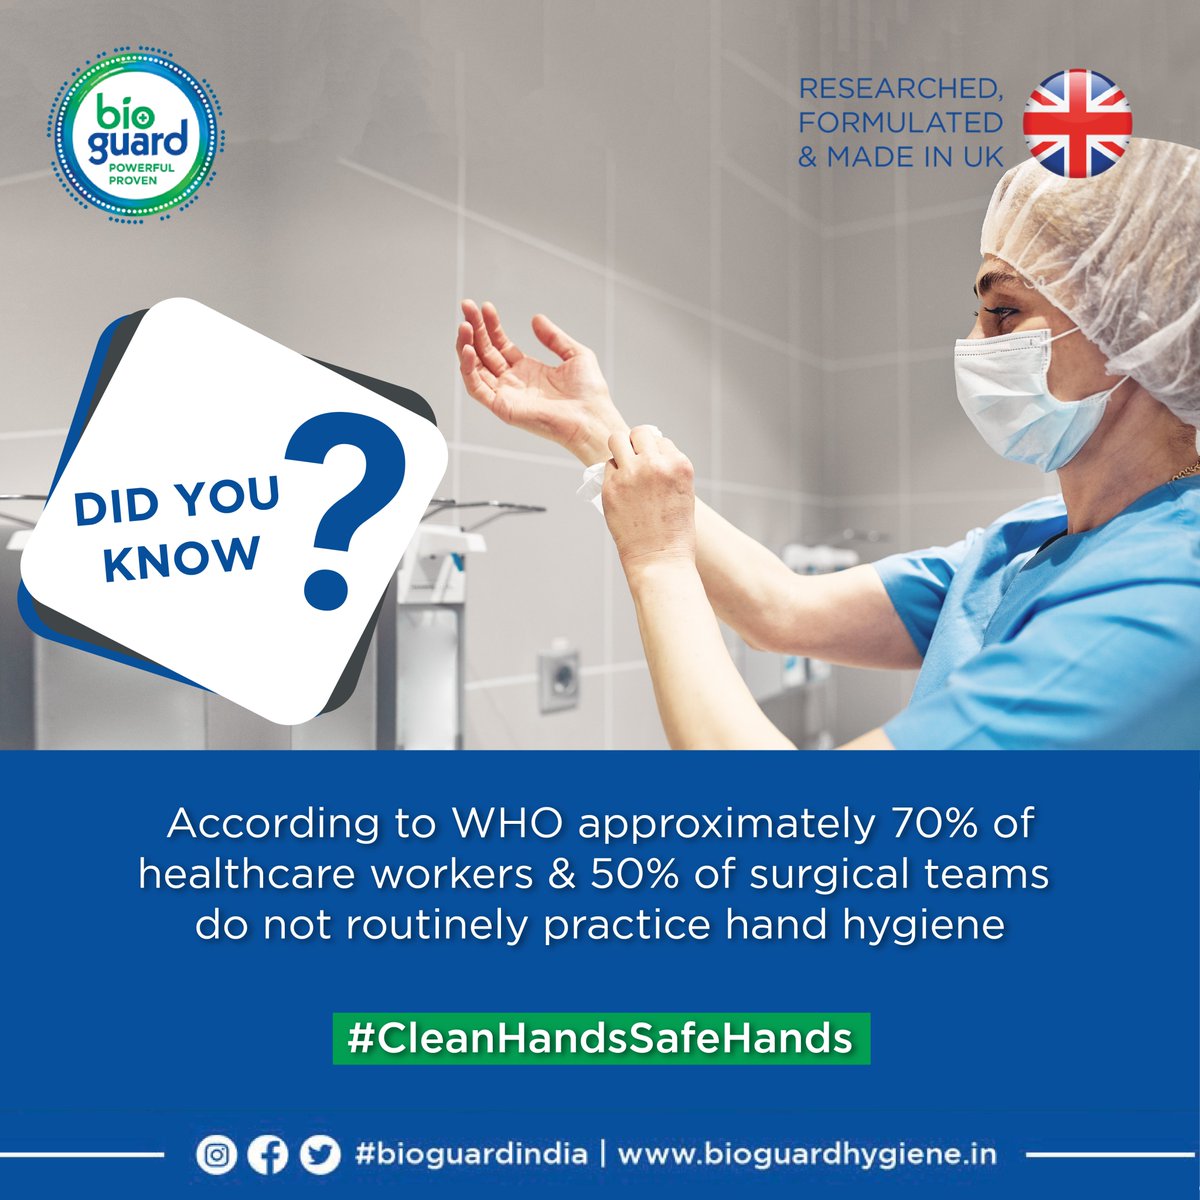 Join the movement for #CleanHandsSafeHands! Let's spread awareness and empower individuals and communities to prioritize hand hygiene for a healthier, safer world. #handhygiene #healthandsafety Instagram :- tinyurl.com/57nac4tw